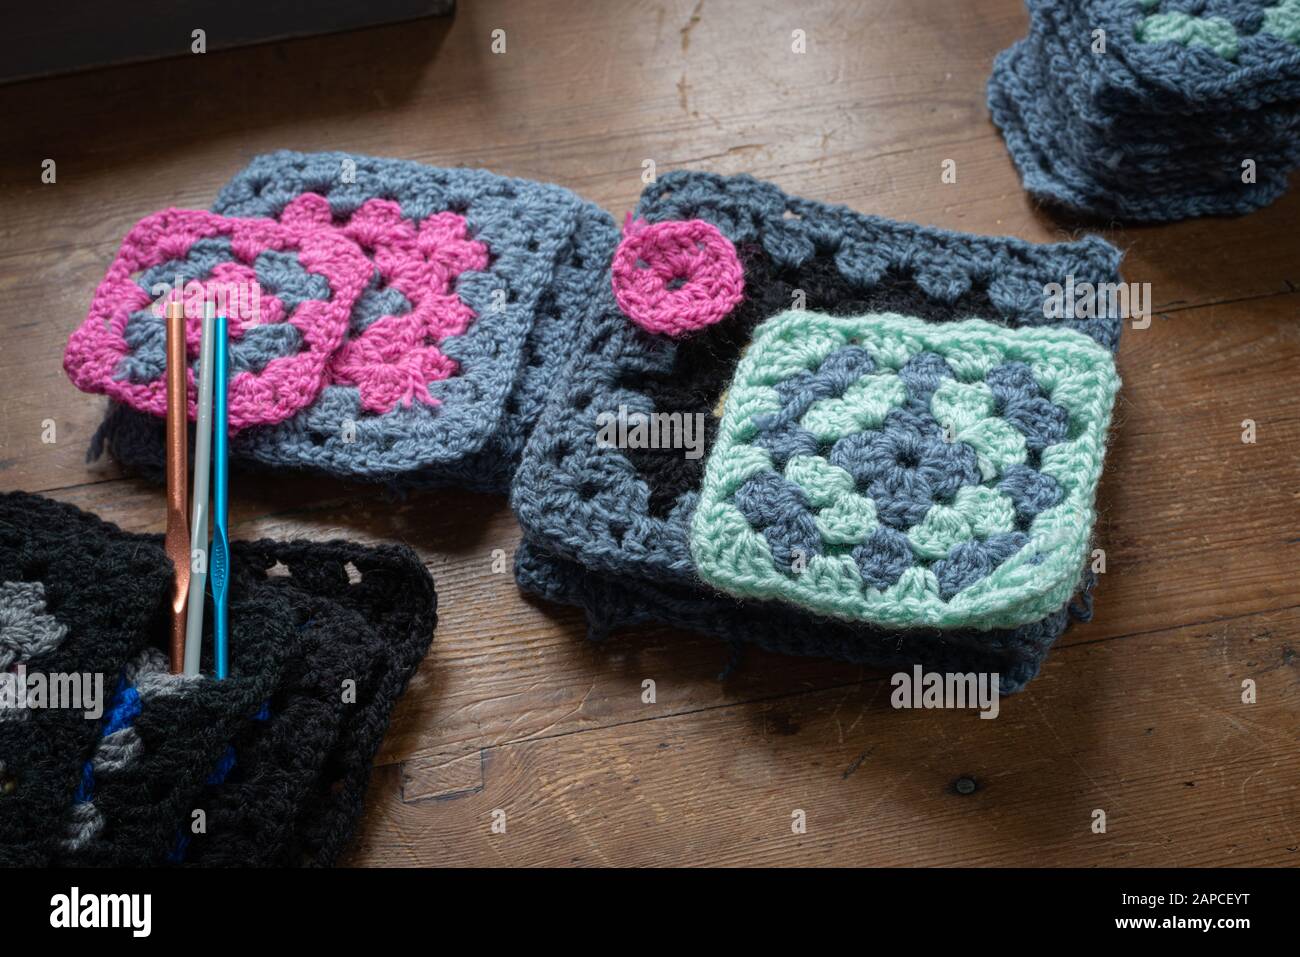 hand made crochet granny squares with crochet hooks on wooden table. Stock Photo